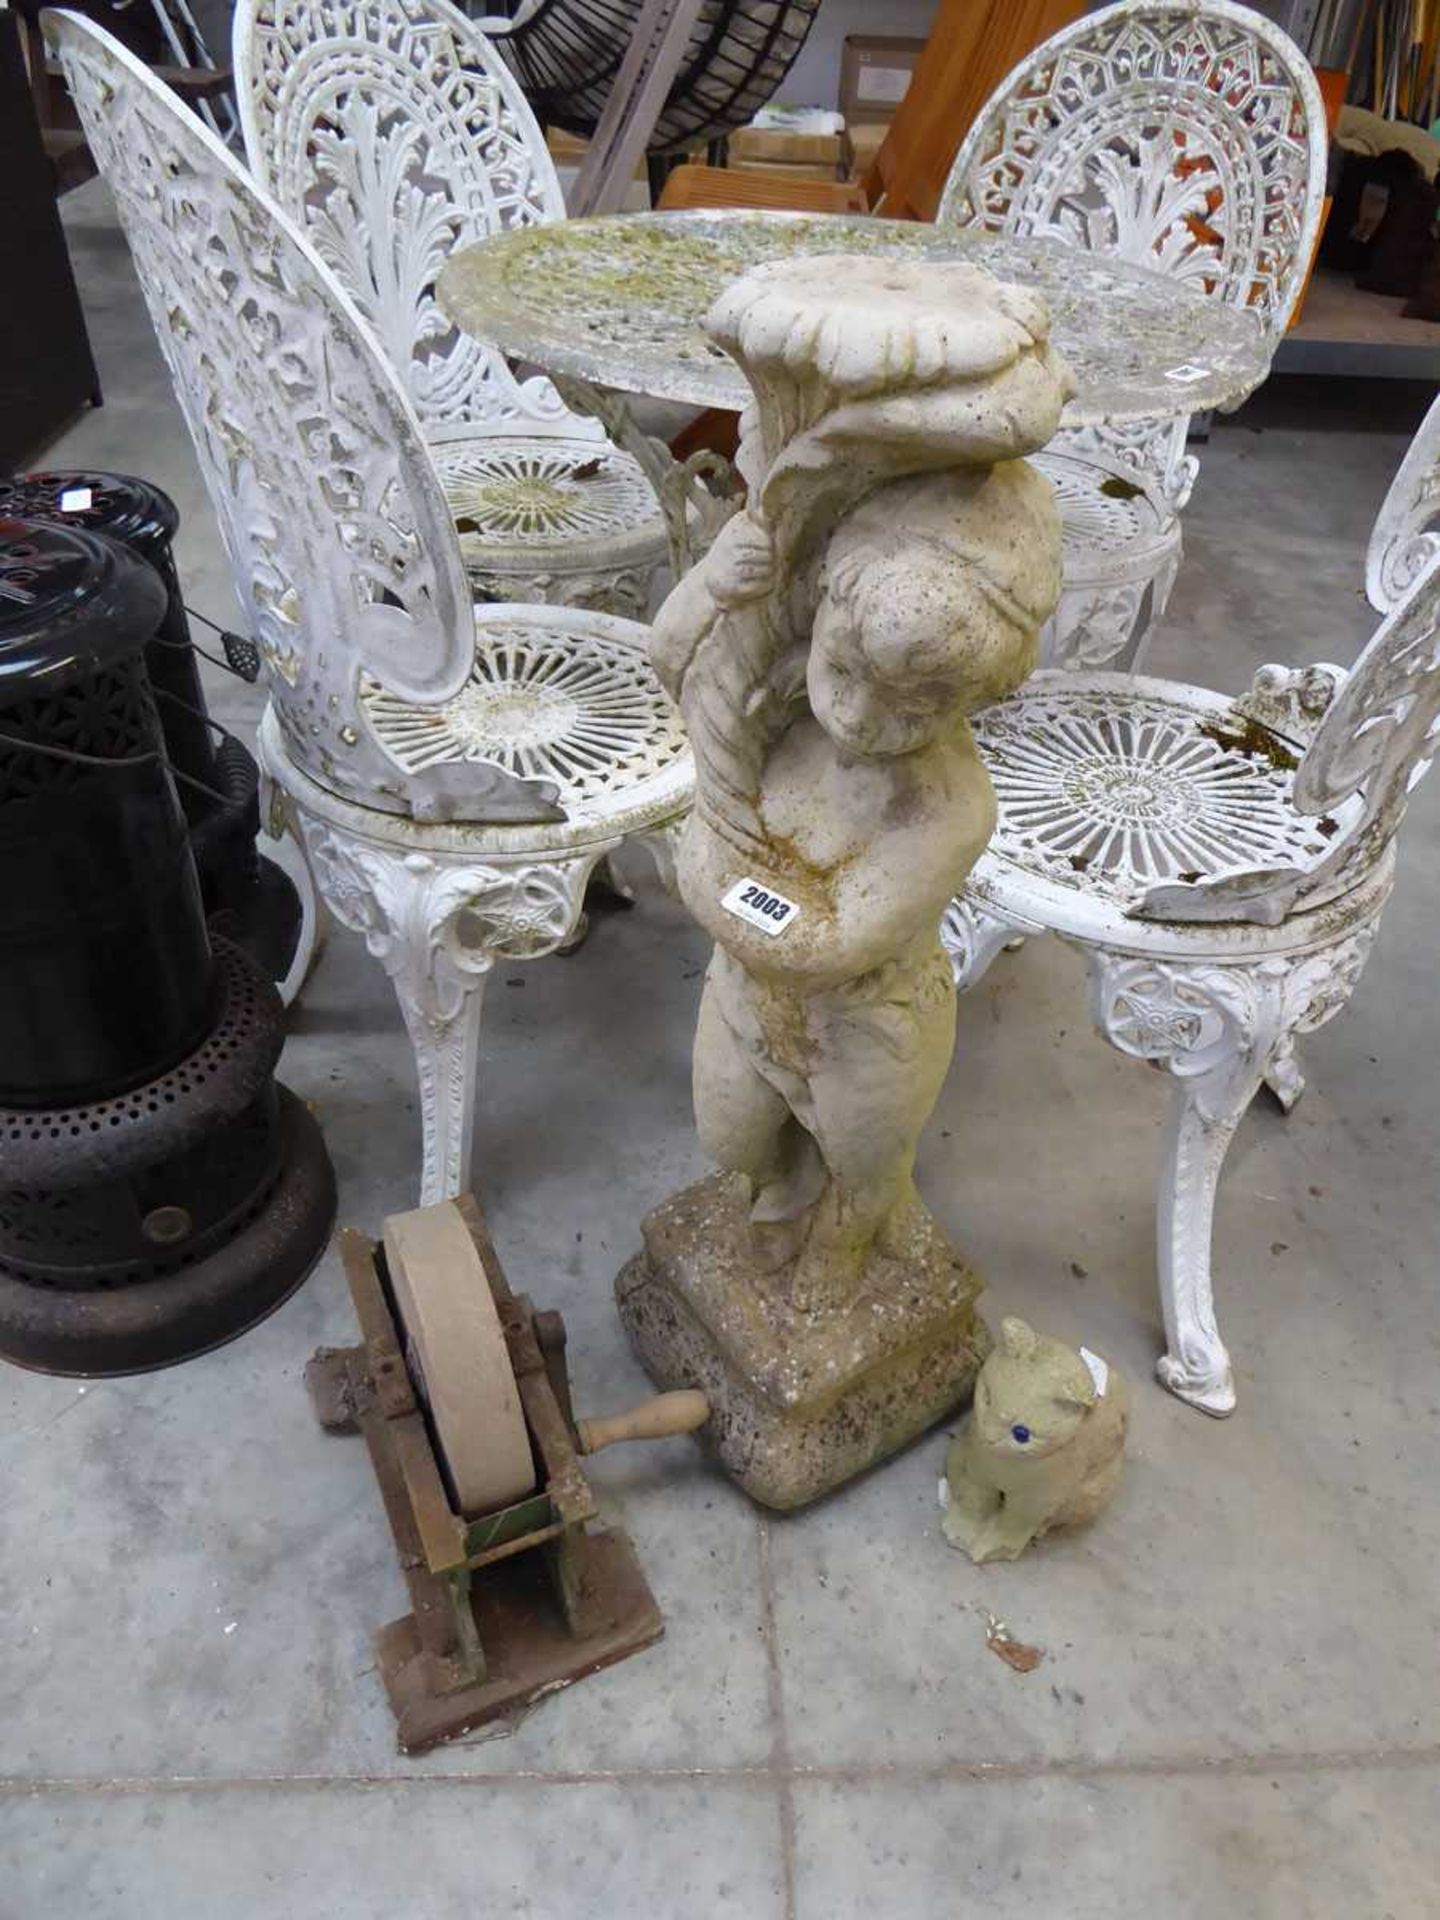 Concrete garden cherub together with small concrete cat and manual grinding wheel